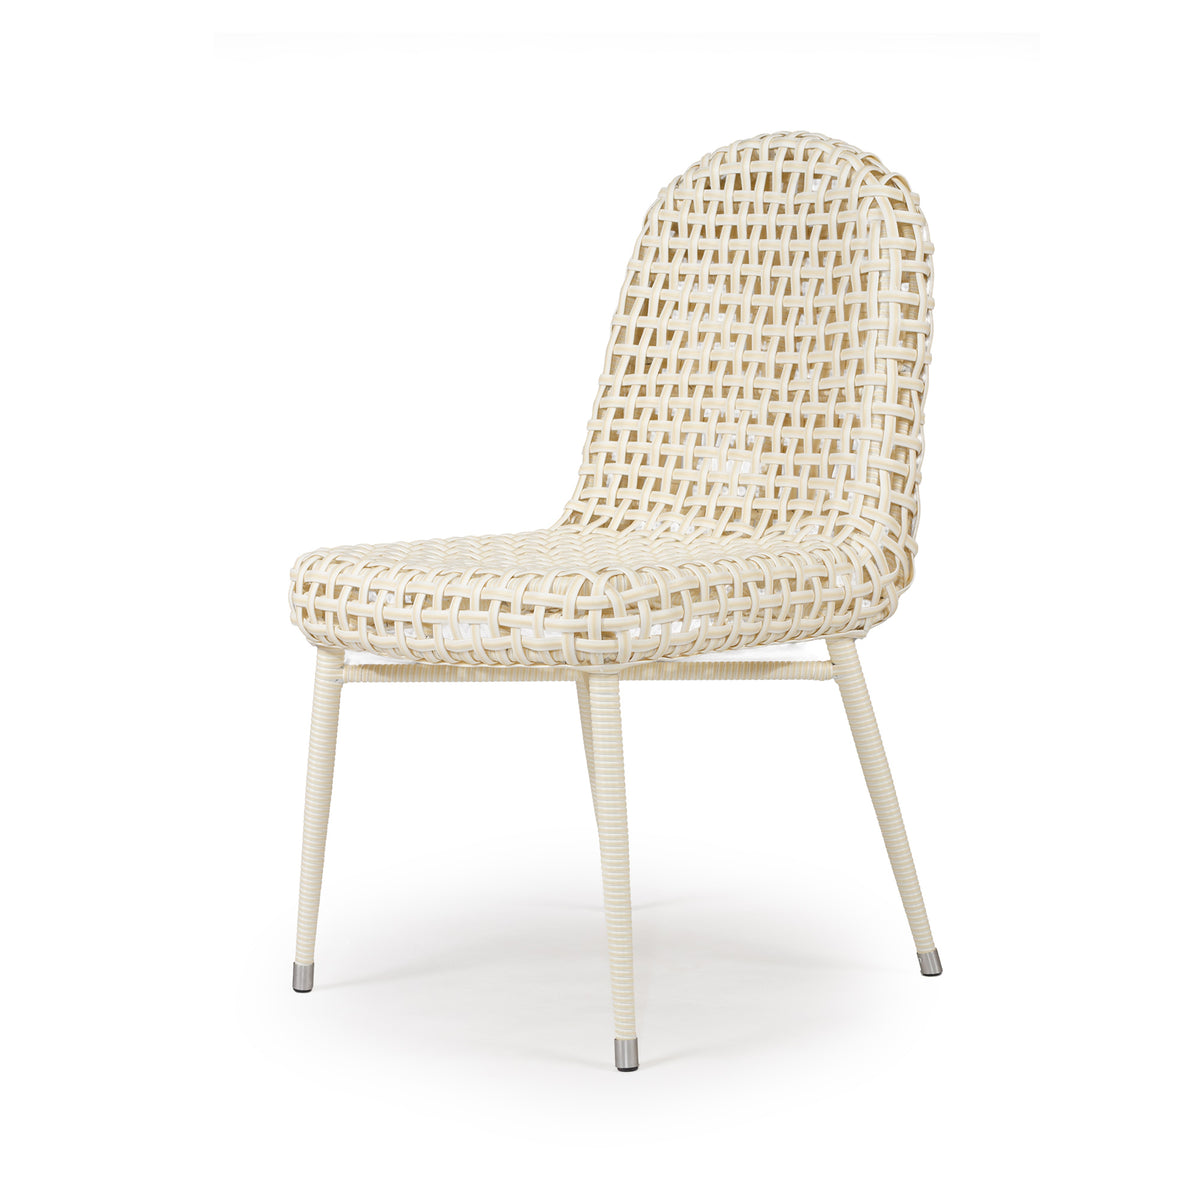 Remy Wicker Outdoor Dining Chair - Beach White